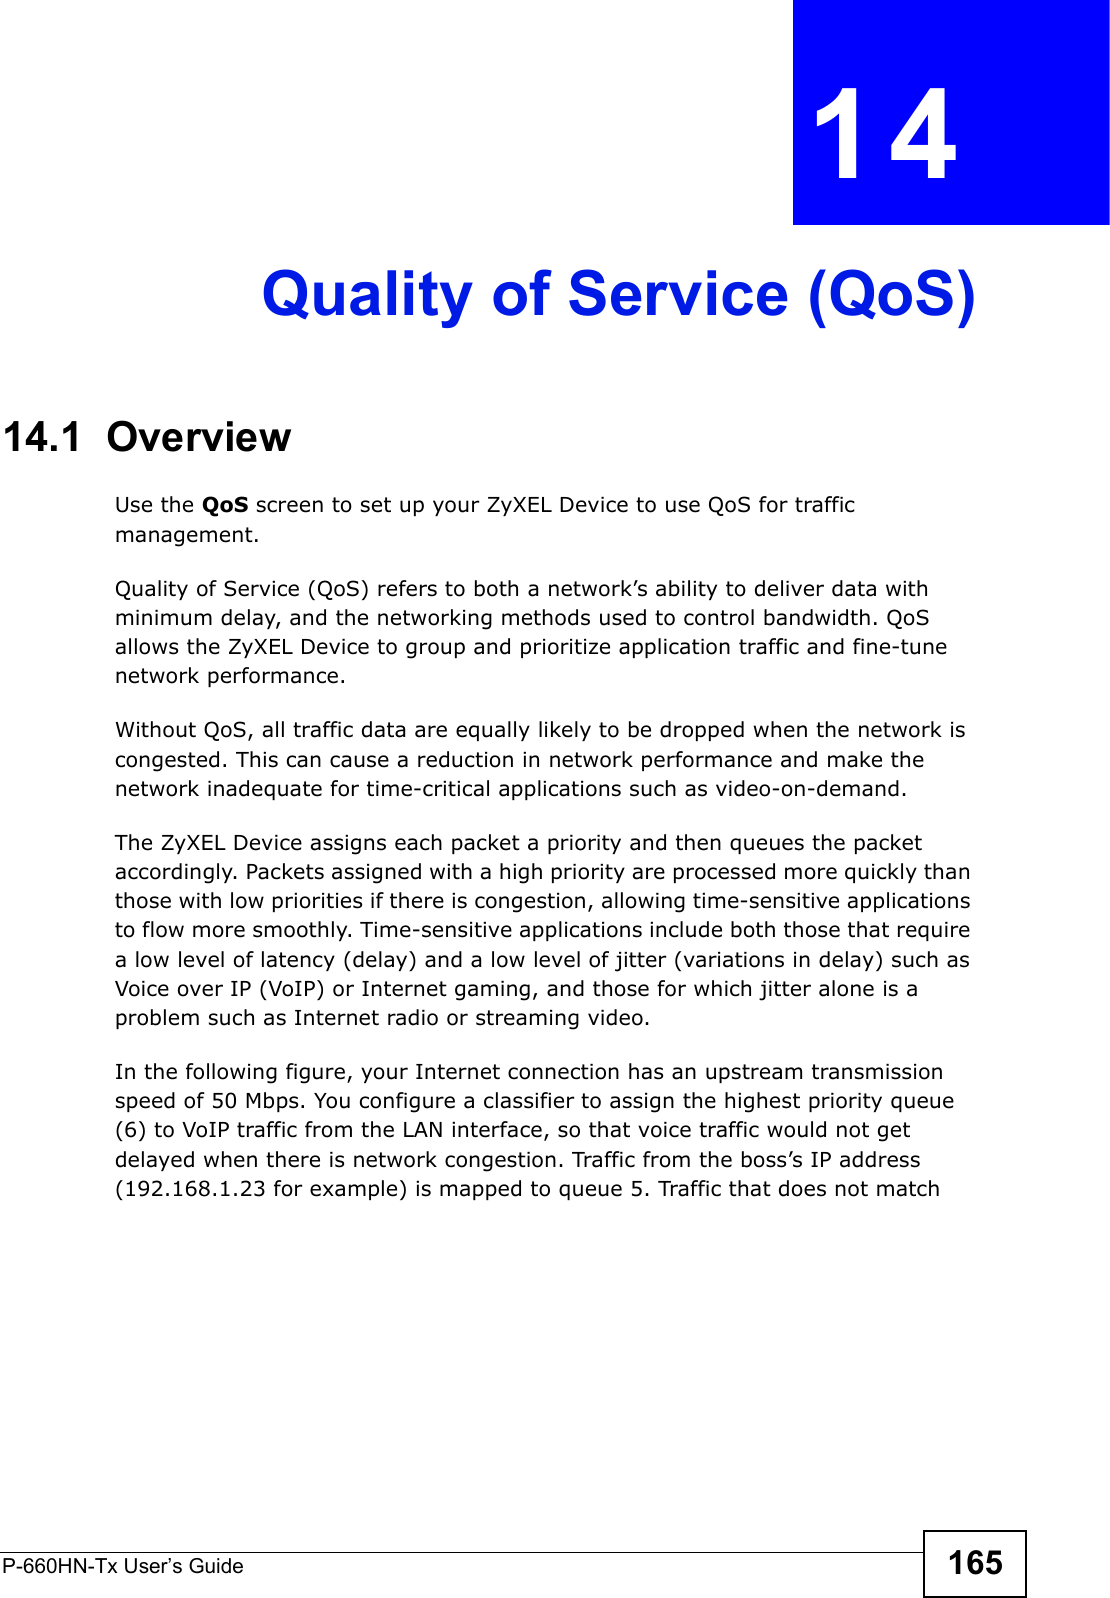 P-660HN-Tx User’s Guide 165CHAPTER  14 Quality of Service (QoS)14.1  OverviewUse the QoS screen to set up your ZyXEL Device to use QoS for traffic management. Quality of Service (QoS) refers to both a network’s ability to deliver data with minimum delay, and the networking methods used to control bandwidth. QoS allows the ZyXEL Device to group and prioritize application traffic and fine-tune network performance. Without QoS, all traffic data are equally likely to be dropped when the network is congested. This can cause a reduction in network performance and make the network inadequate for time-critical applications such as video-on-demand.The ZyXEL Device assigns each packet a priority and then queues the packet accordingly. Packets assigned with a high priority are processed more quickly than those with low priorities if there is congestion, allowing time-sensitive applications to flow more smoothly. Time-sensitive applications include both those that require a low level of latency (delay) and a low level of jitter (variations in delay) such as Voice over IP (VoIP) or Internet gaming, and those for which jitter alone is a problem such as Internet radio or streaming video.In the following figure, your Internet connection has an upstream transmission speed of 50 Mbps. You configure a classifier to assign the highest priority queue (6) to VoIP traffic from the LAN interface, so that voice traffic would not get delayed when there is network congestion. Traffic from the boss’s IP address (192.168.1.23 for example) is mapped to queue 5. Traffic that does not match 